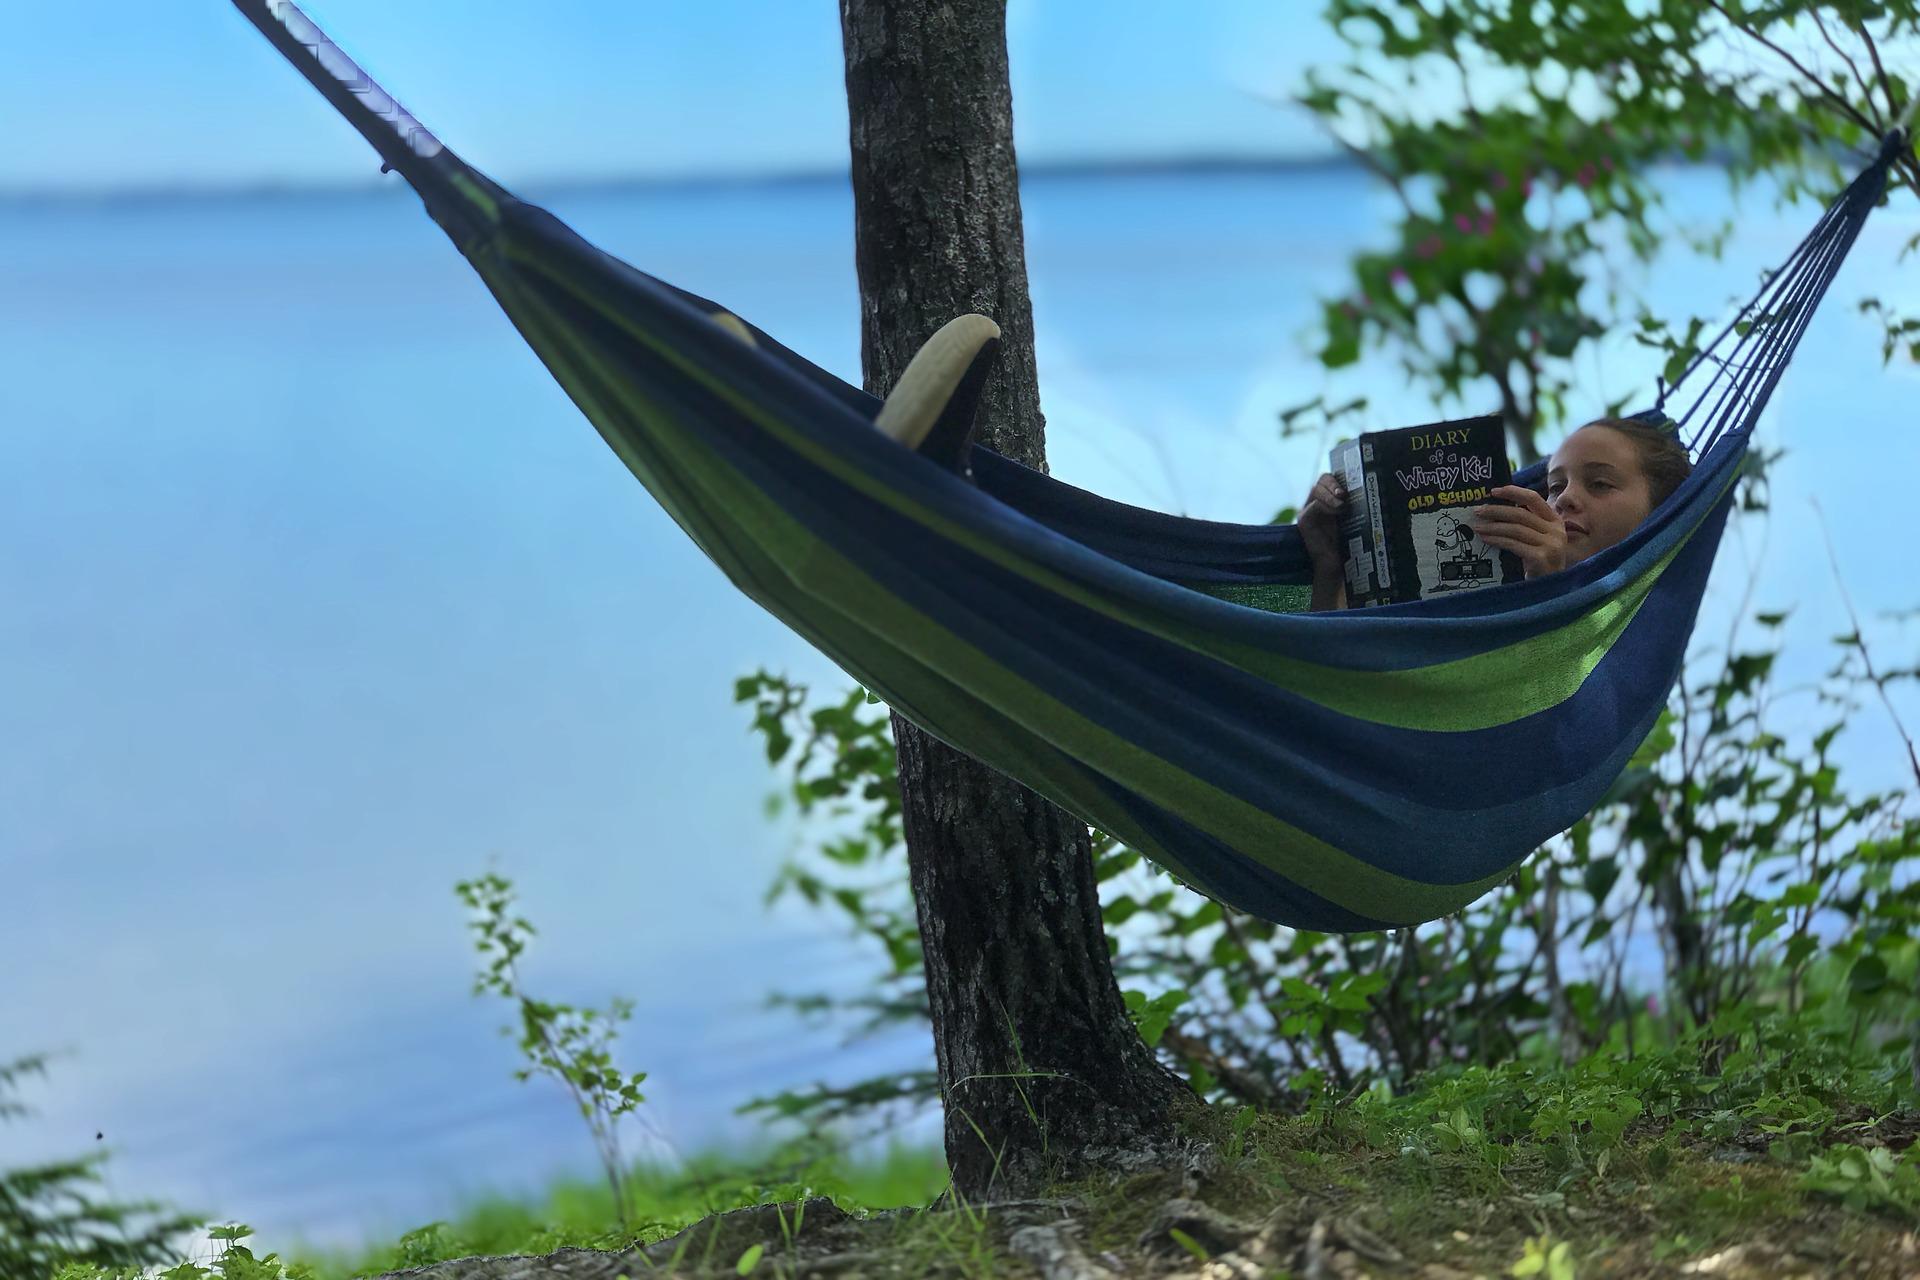 A kid reads a book in a hammock by a lake